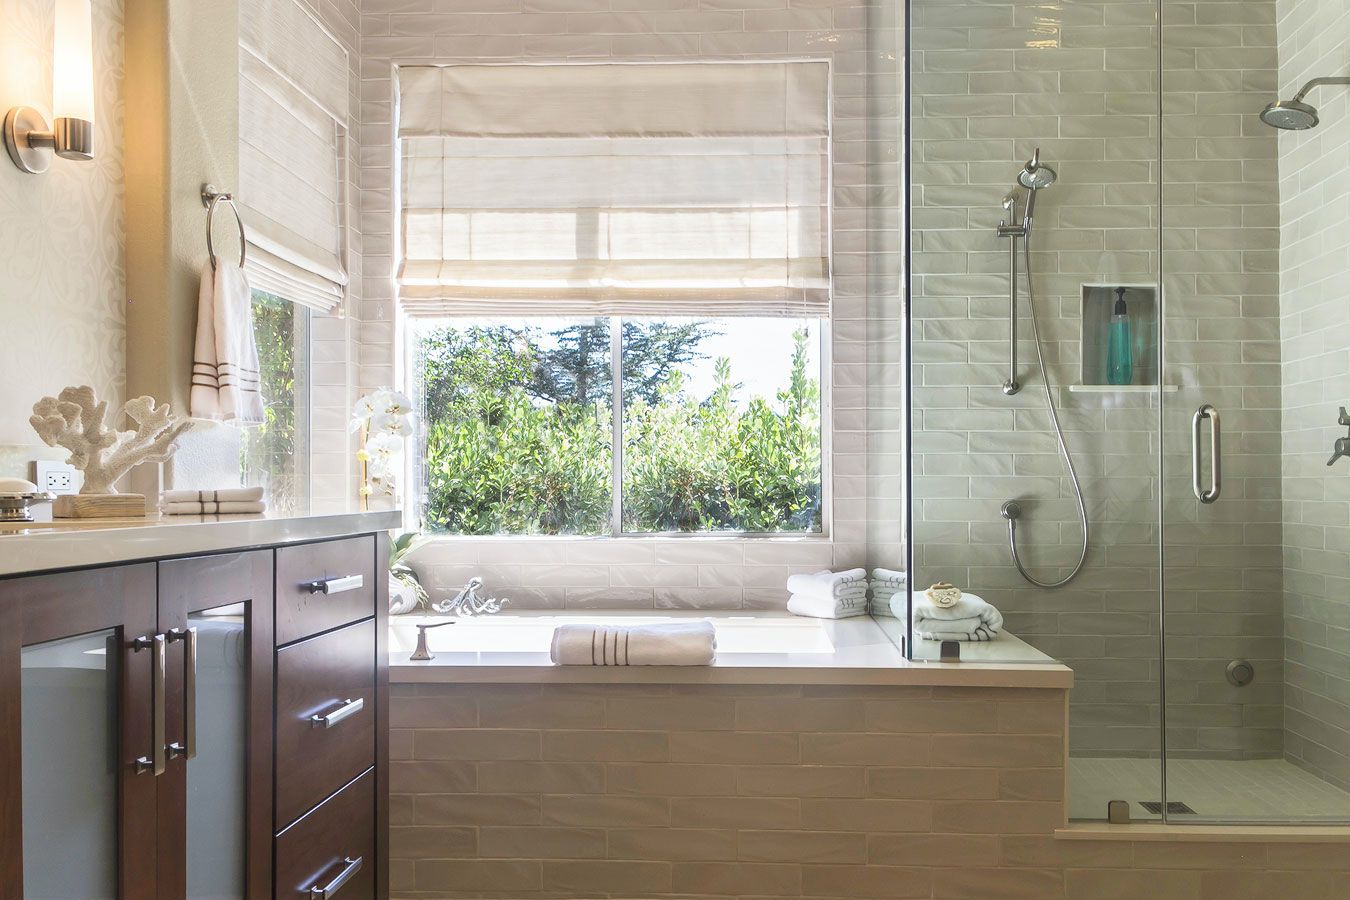 Master Bathroom with tub surround, steam shower and custom vanity with glass and wood doors.